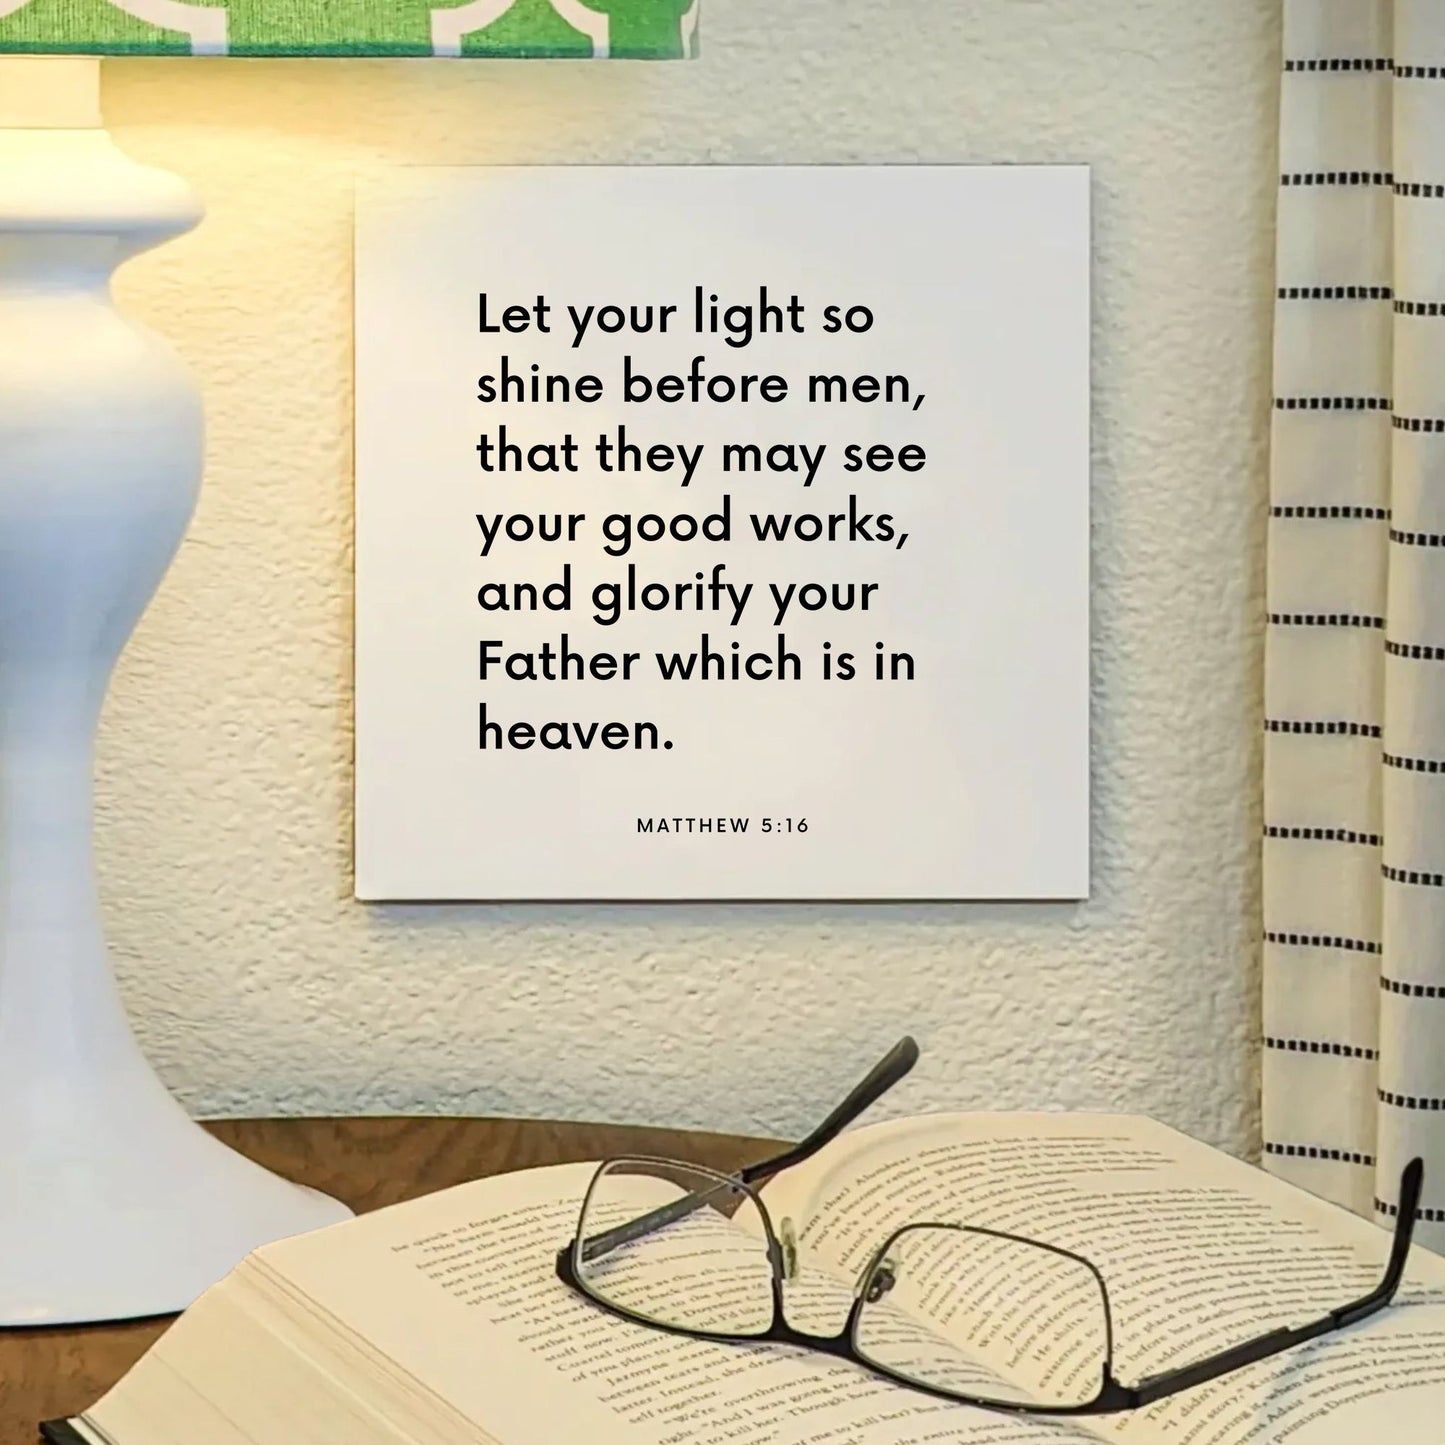 Lamp mouting of the scripture tile for Matthew 5:16 - "Let your light so shine before men"